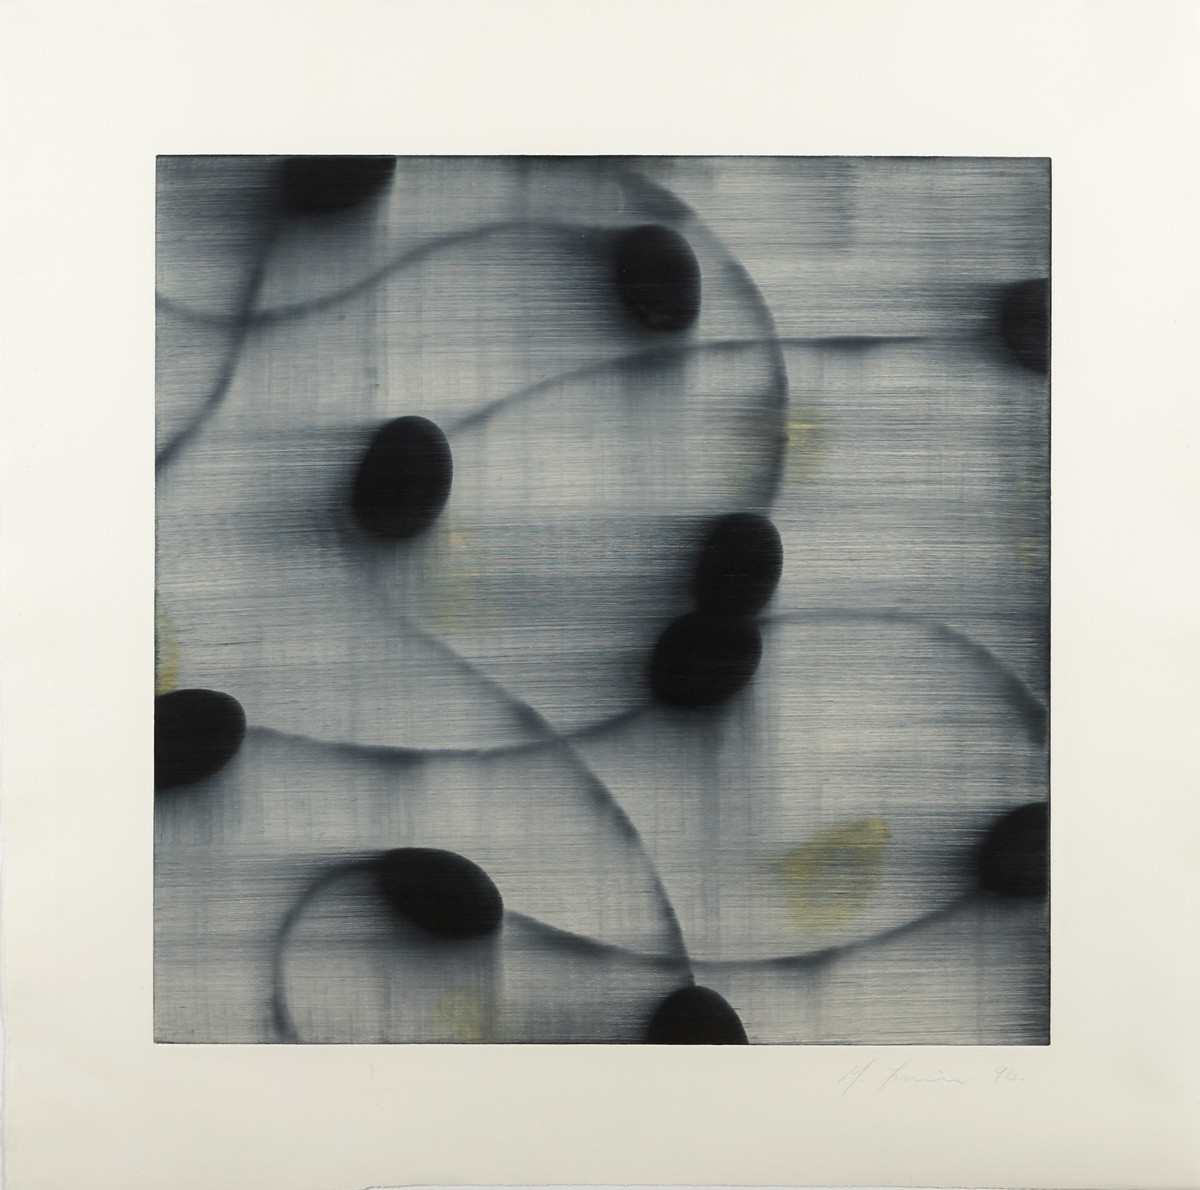 UNTITLED, 1994 by Mark Francis sold for 2,400 at Whyte's Auctions